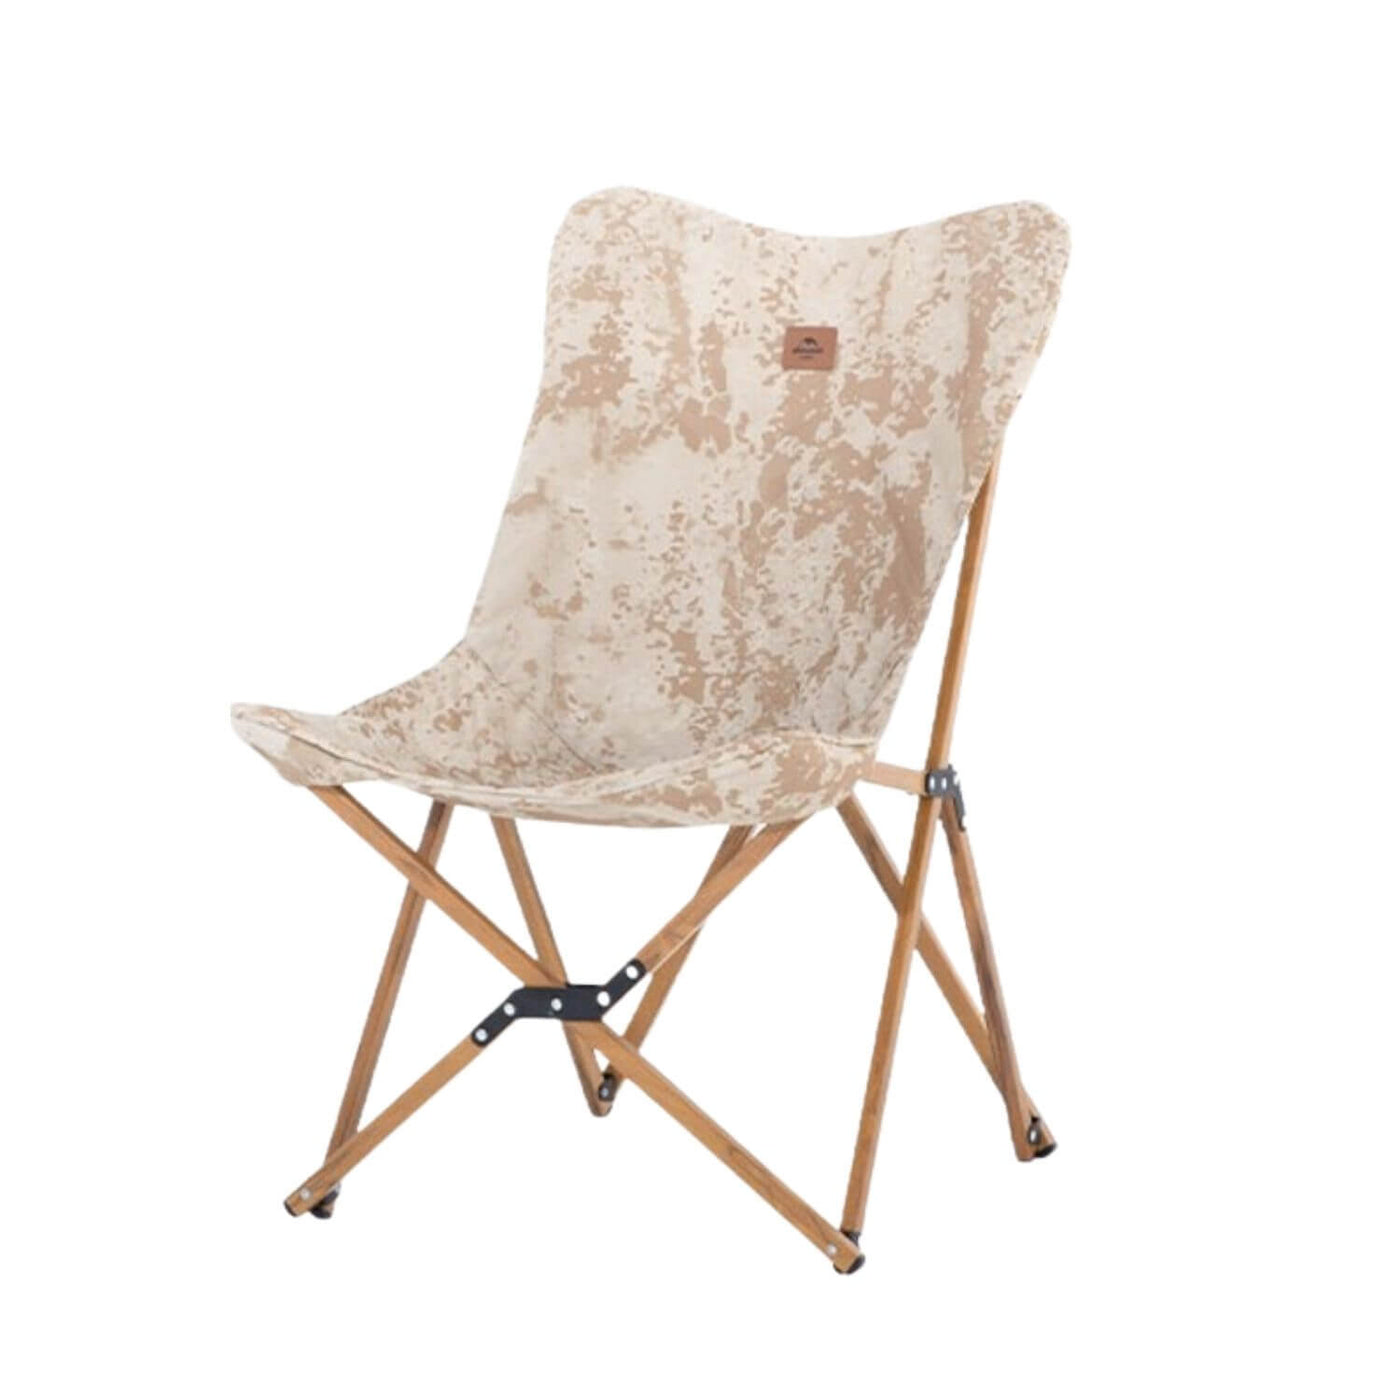 Compact outdoor folding chair